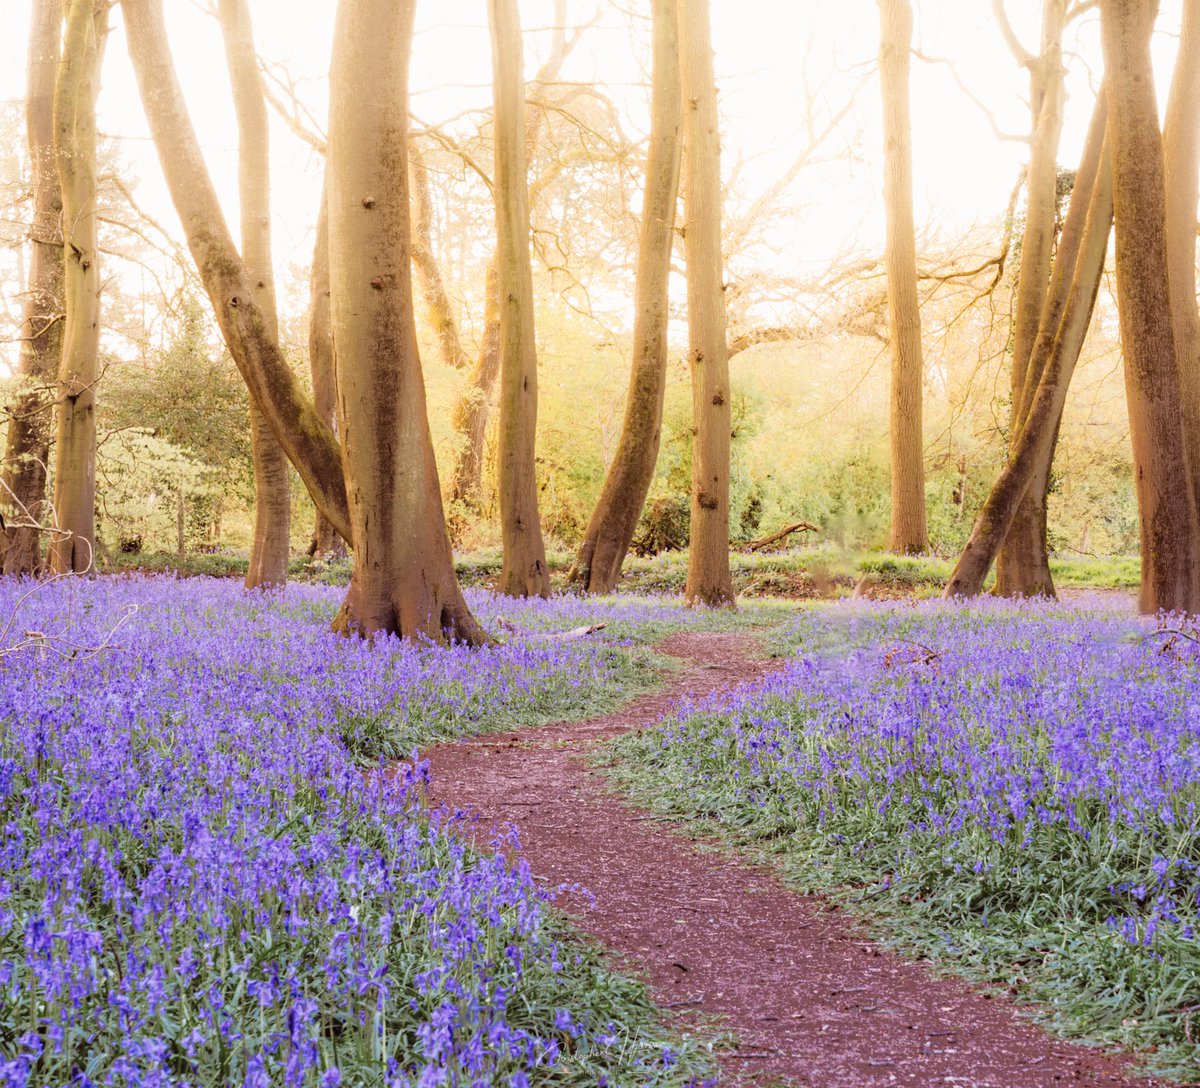 The path through the bluebells.

Would you like to wander through this beautiful ancient woodland?

#photography #bluebells #landscapephotography